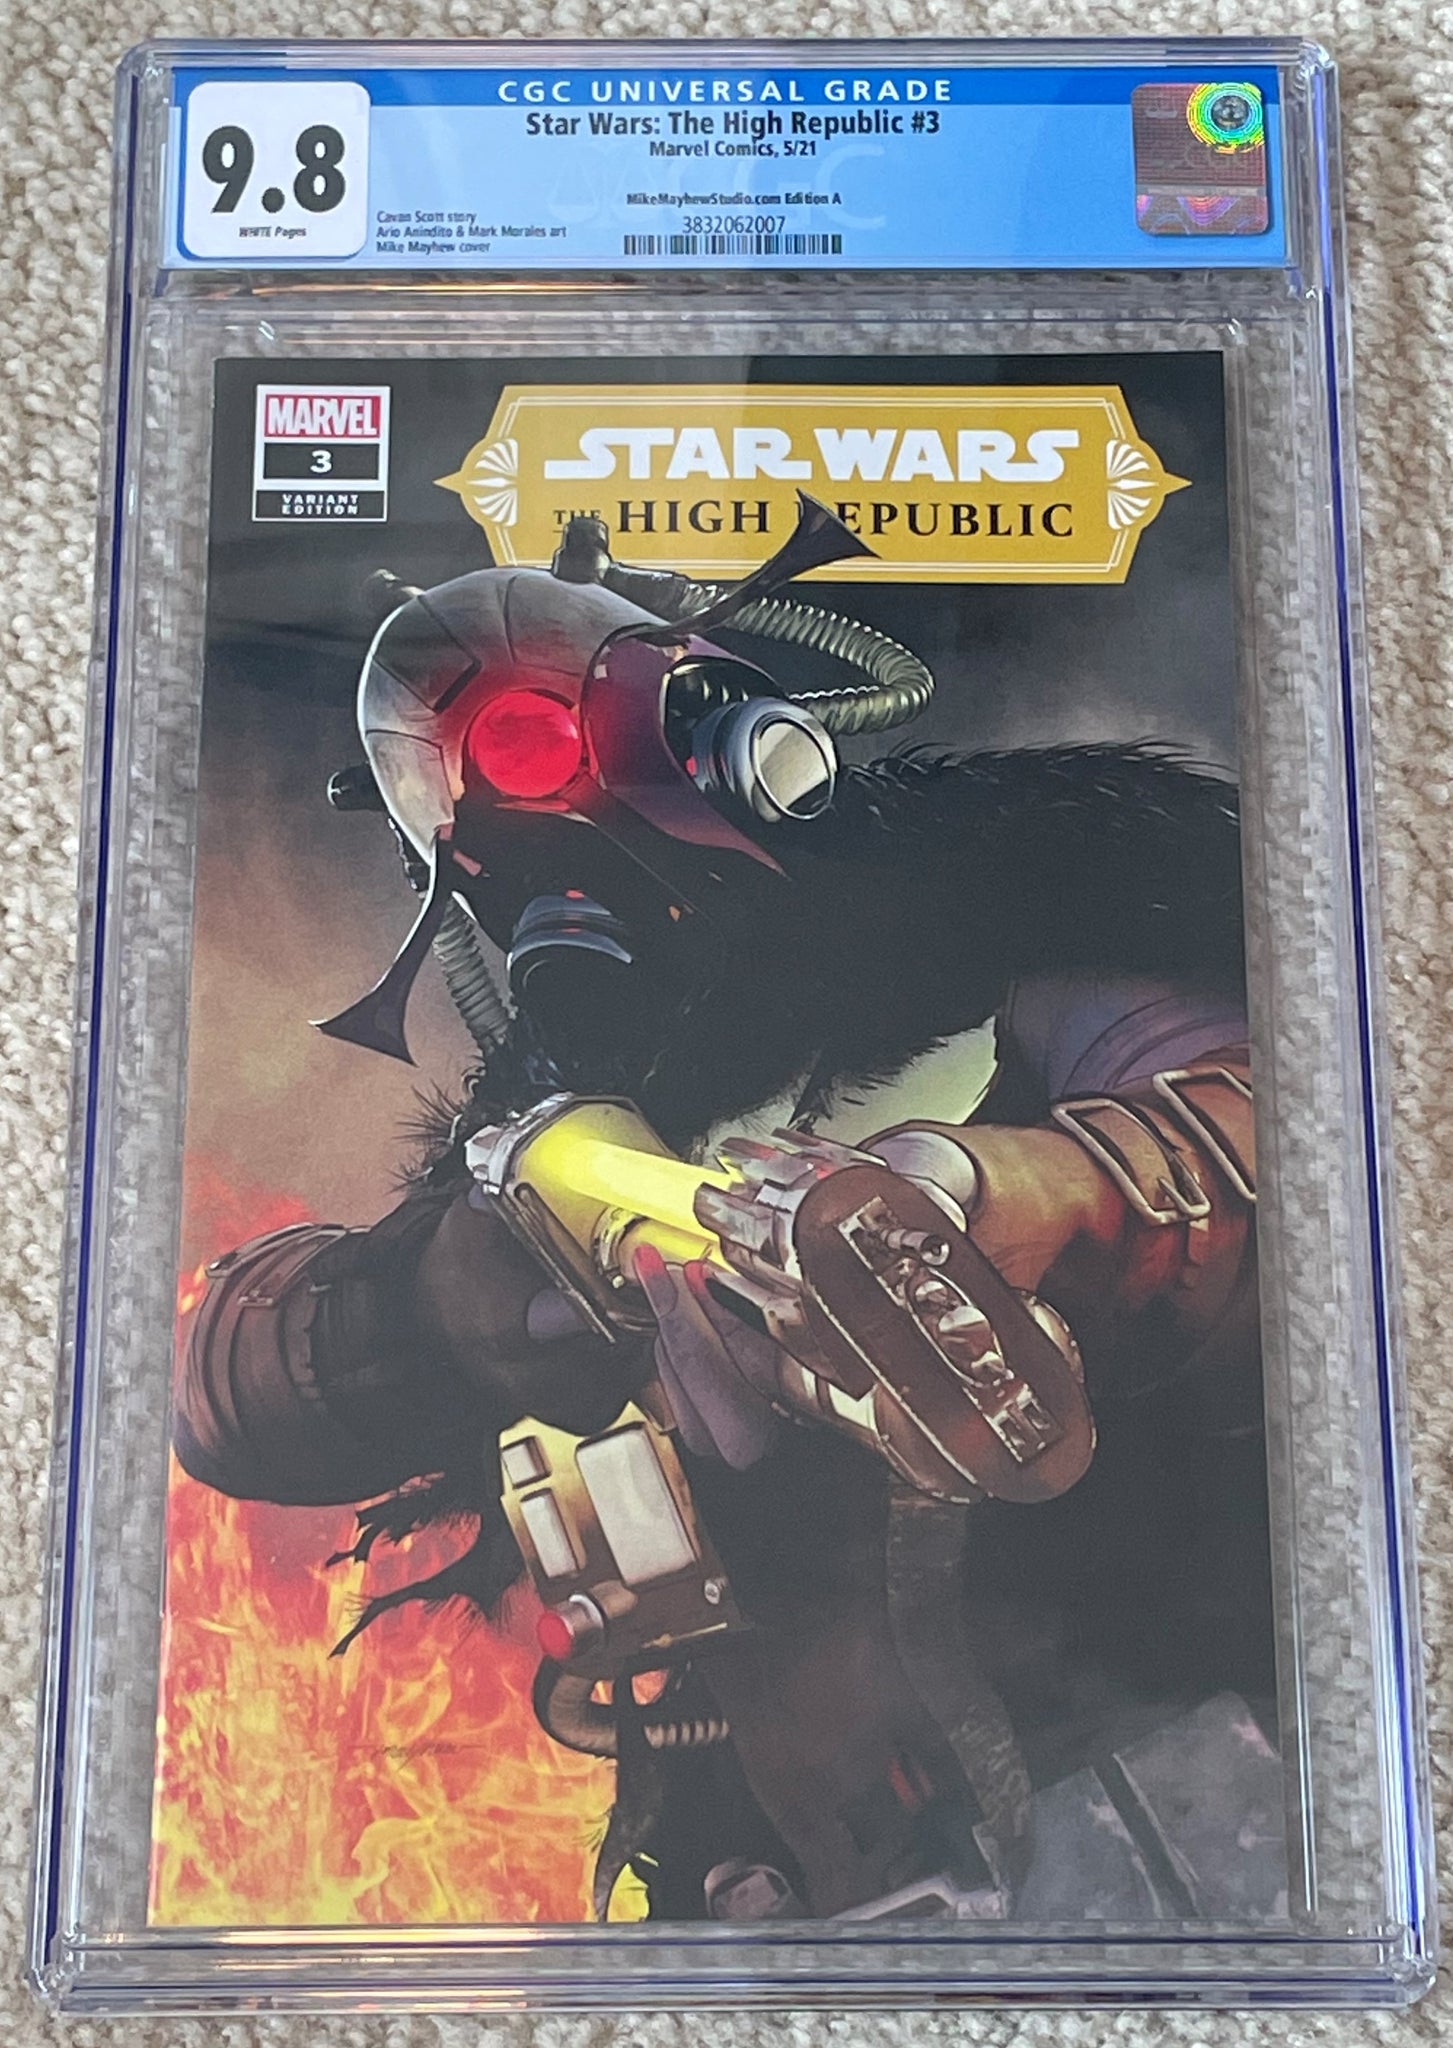 STAR WARS HIGH REPUBLIC #3 CGC 9.8 MIKE MAYHEW MARCHION RO TRADE DRESS VARIANT-A